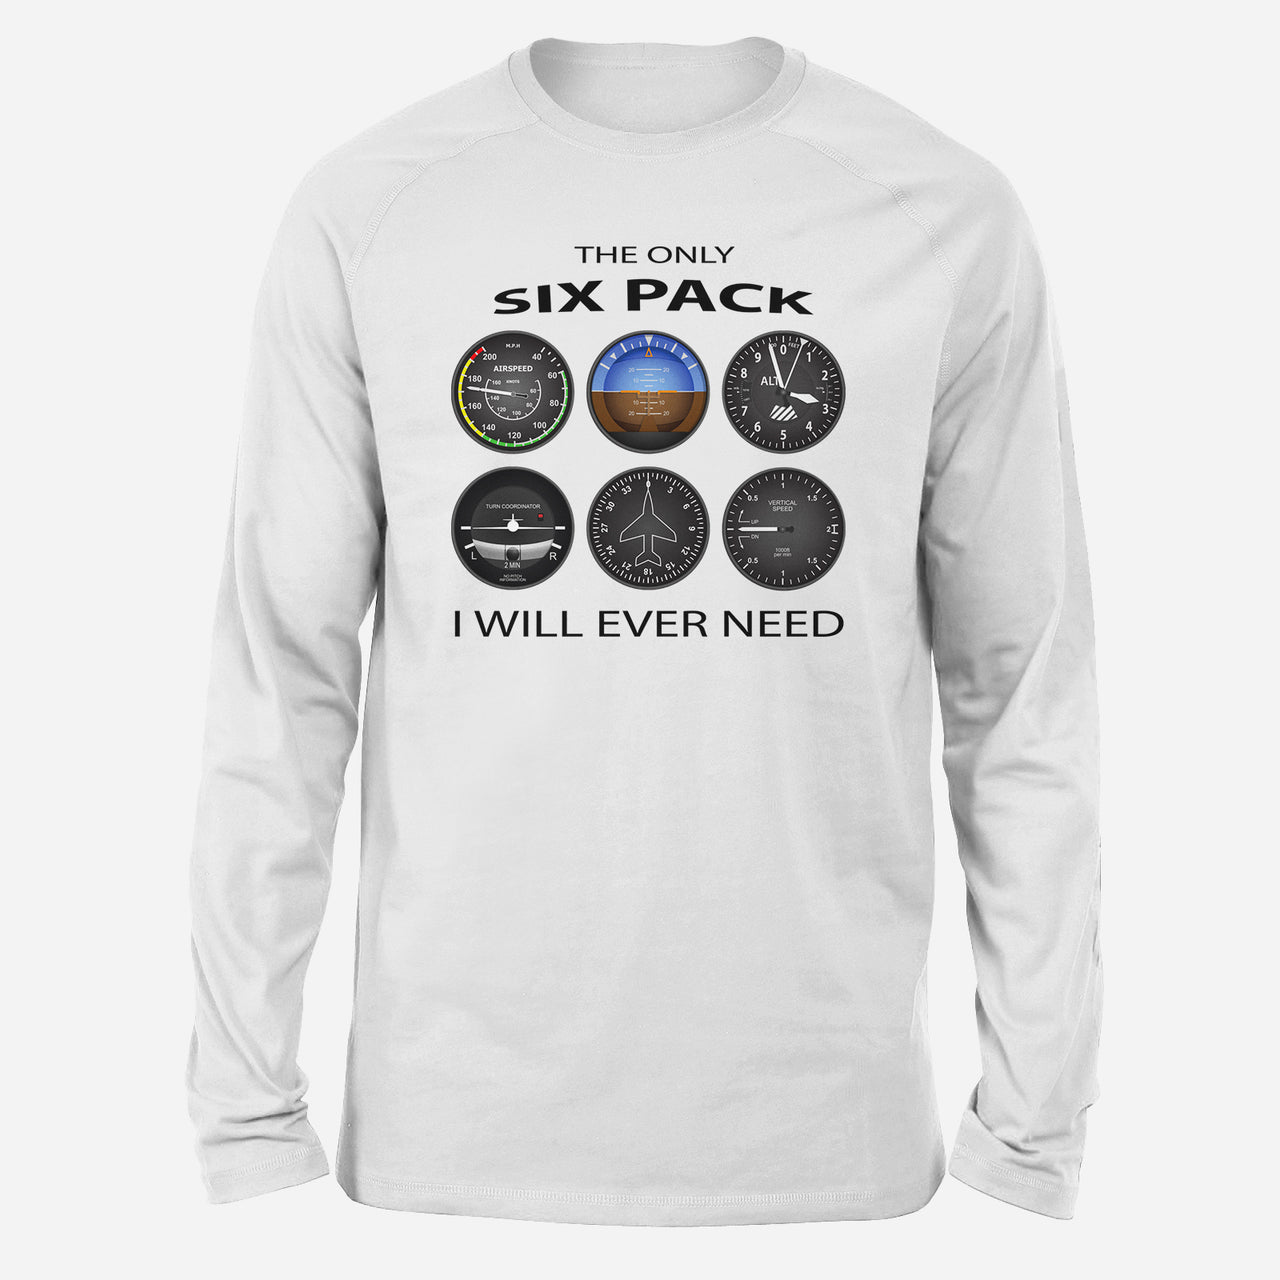 The Only Six Pack I Will Ever Need Designed Long-Sleeve T-Shirts